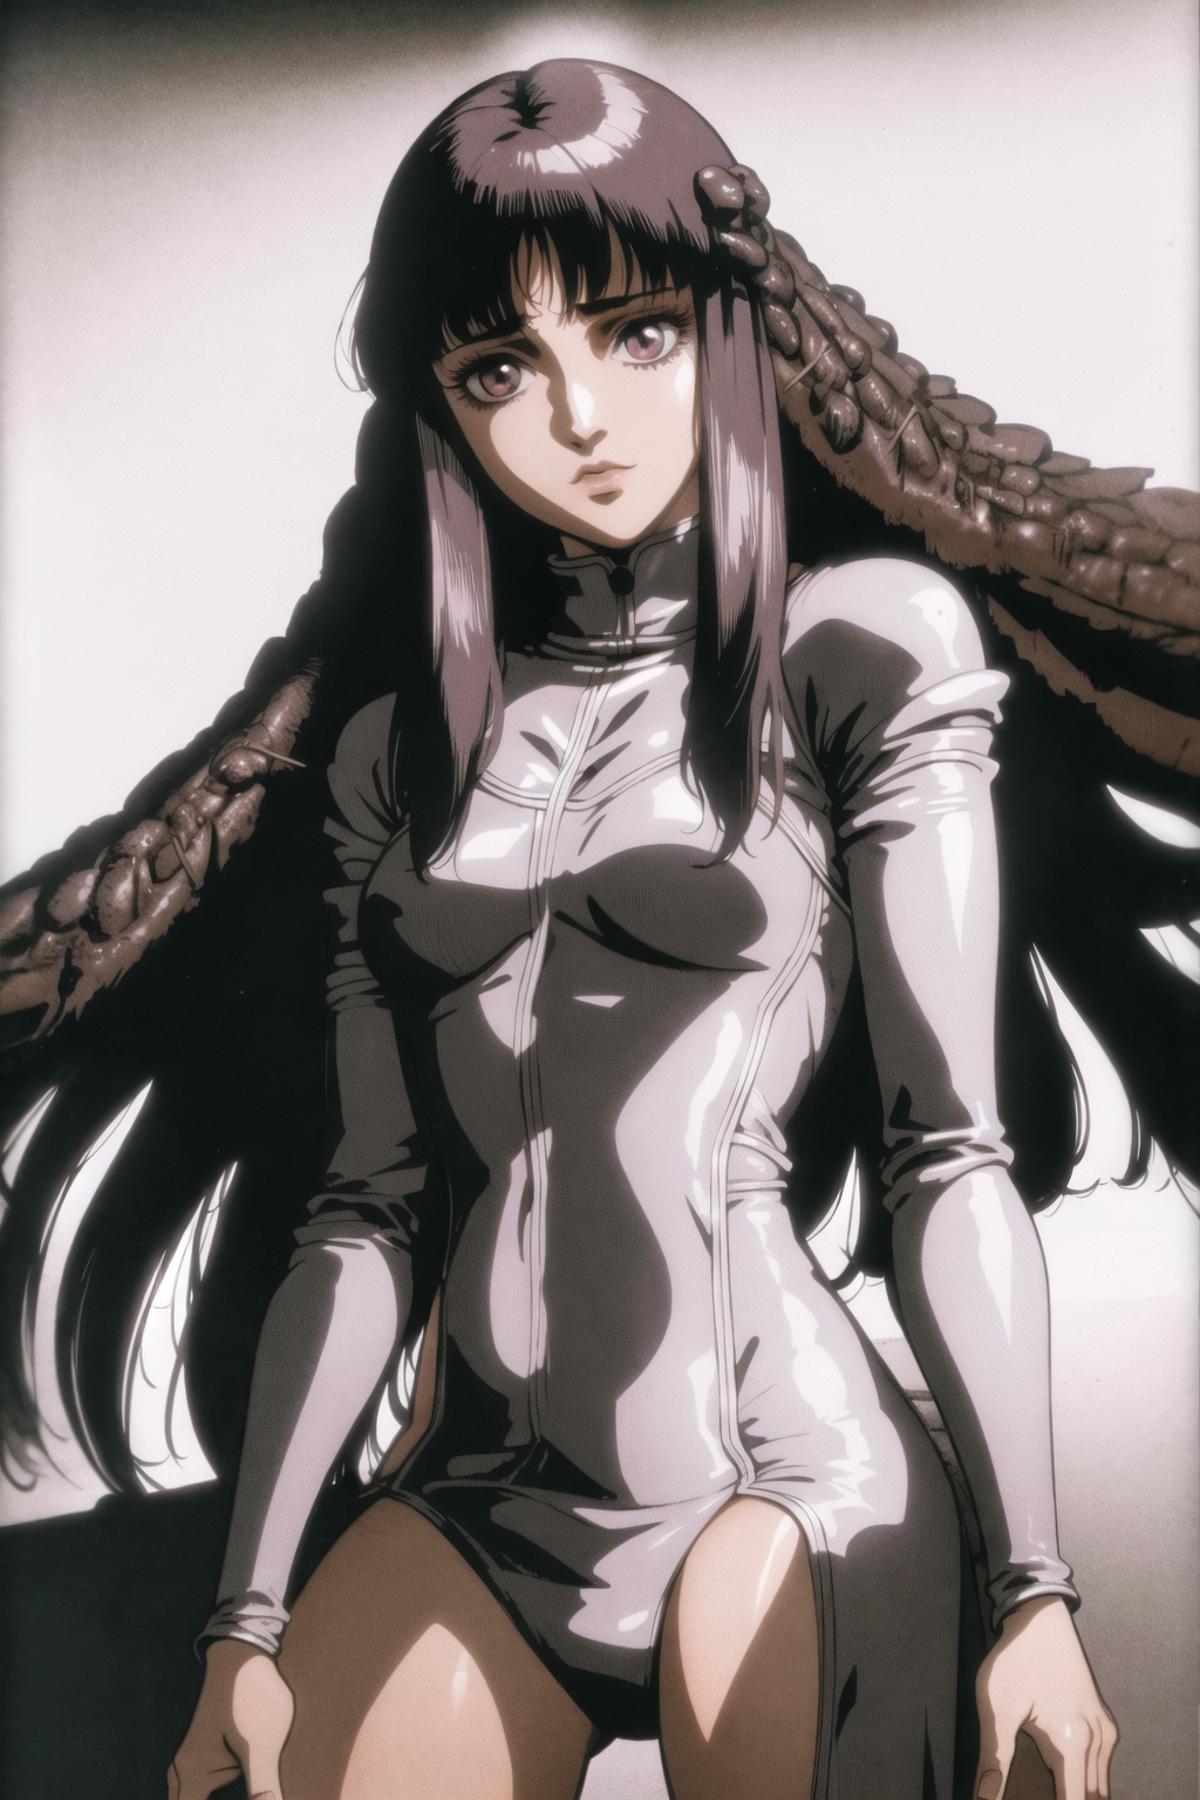 A manga-style drawing of a woman wearing a silver and black bodysuit.